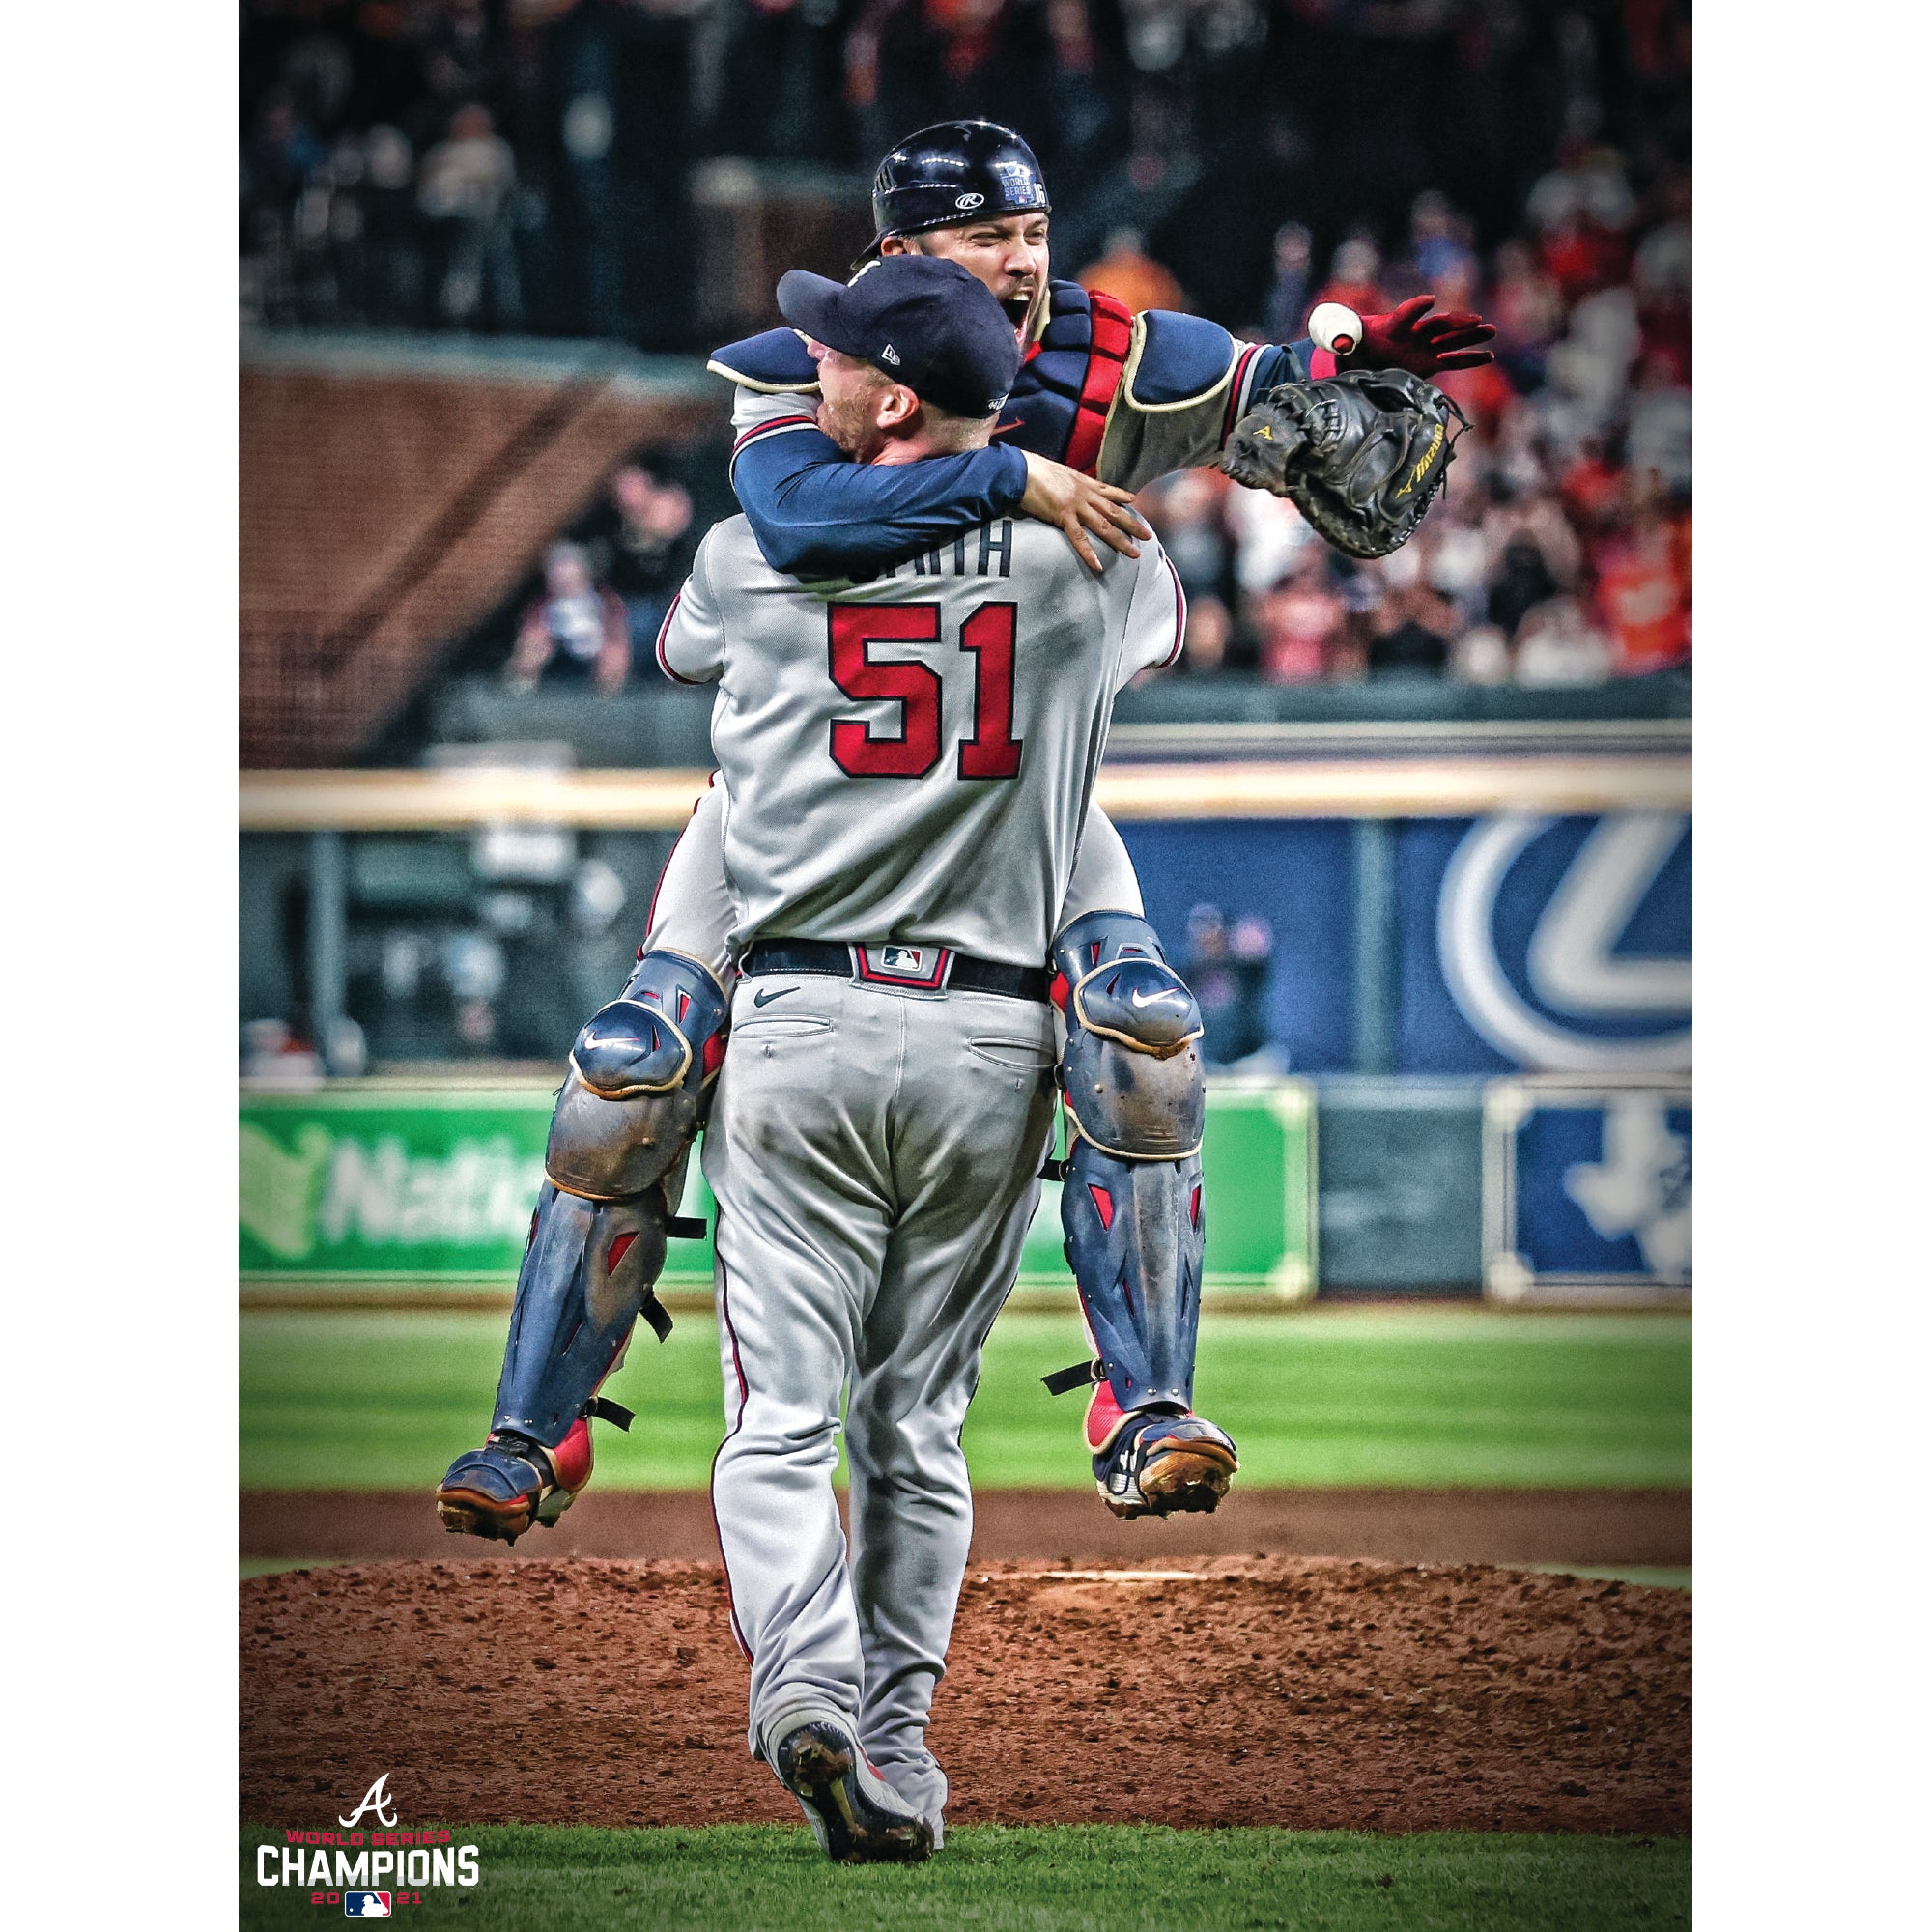 Atlanta Braves: Will Smith and Travis d'Arnaud 2021 World Series Celebration Poster - MLB Removable Adhesive Wall Decal Large